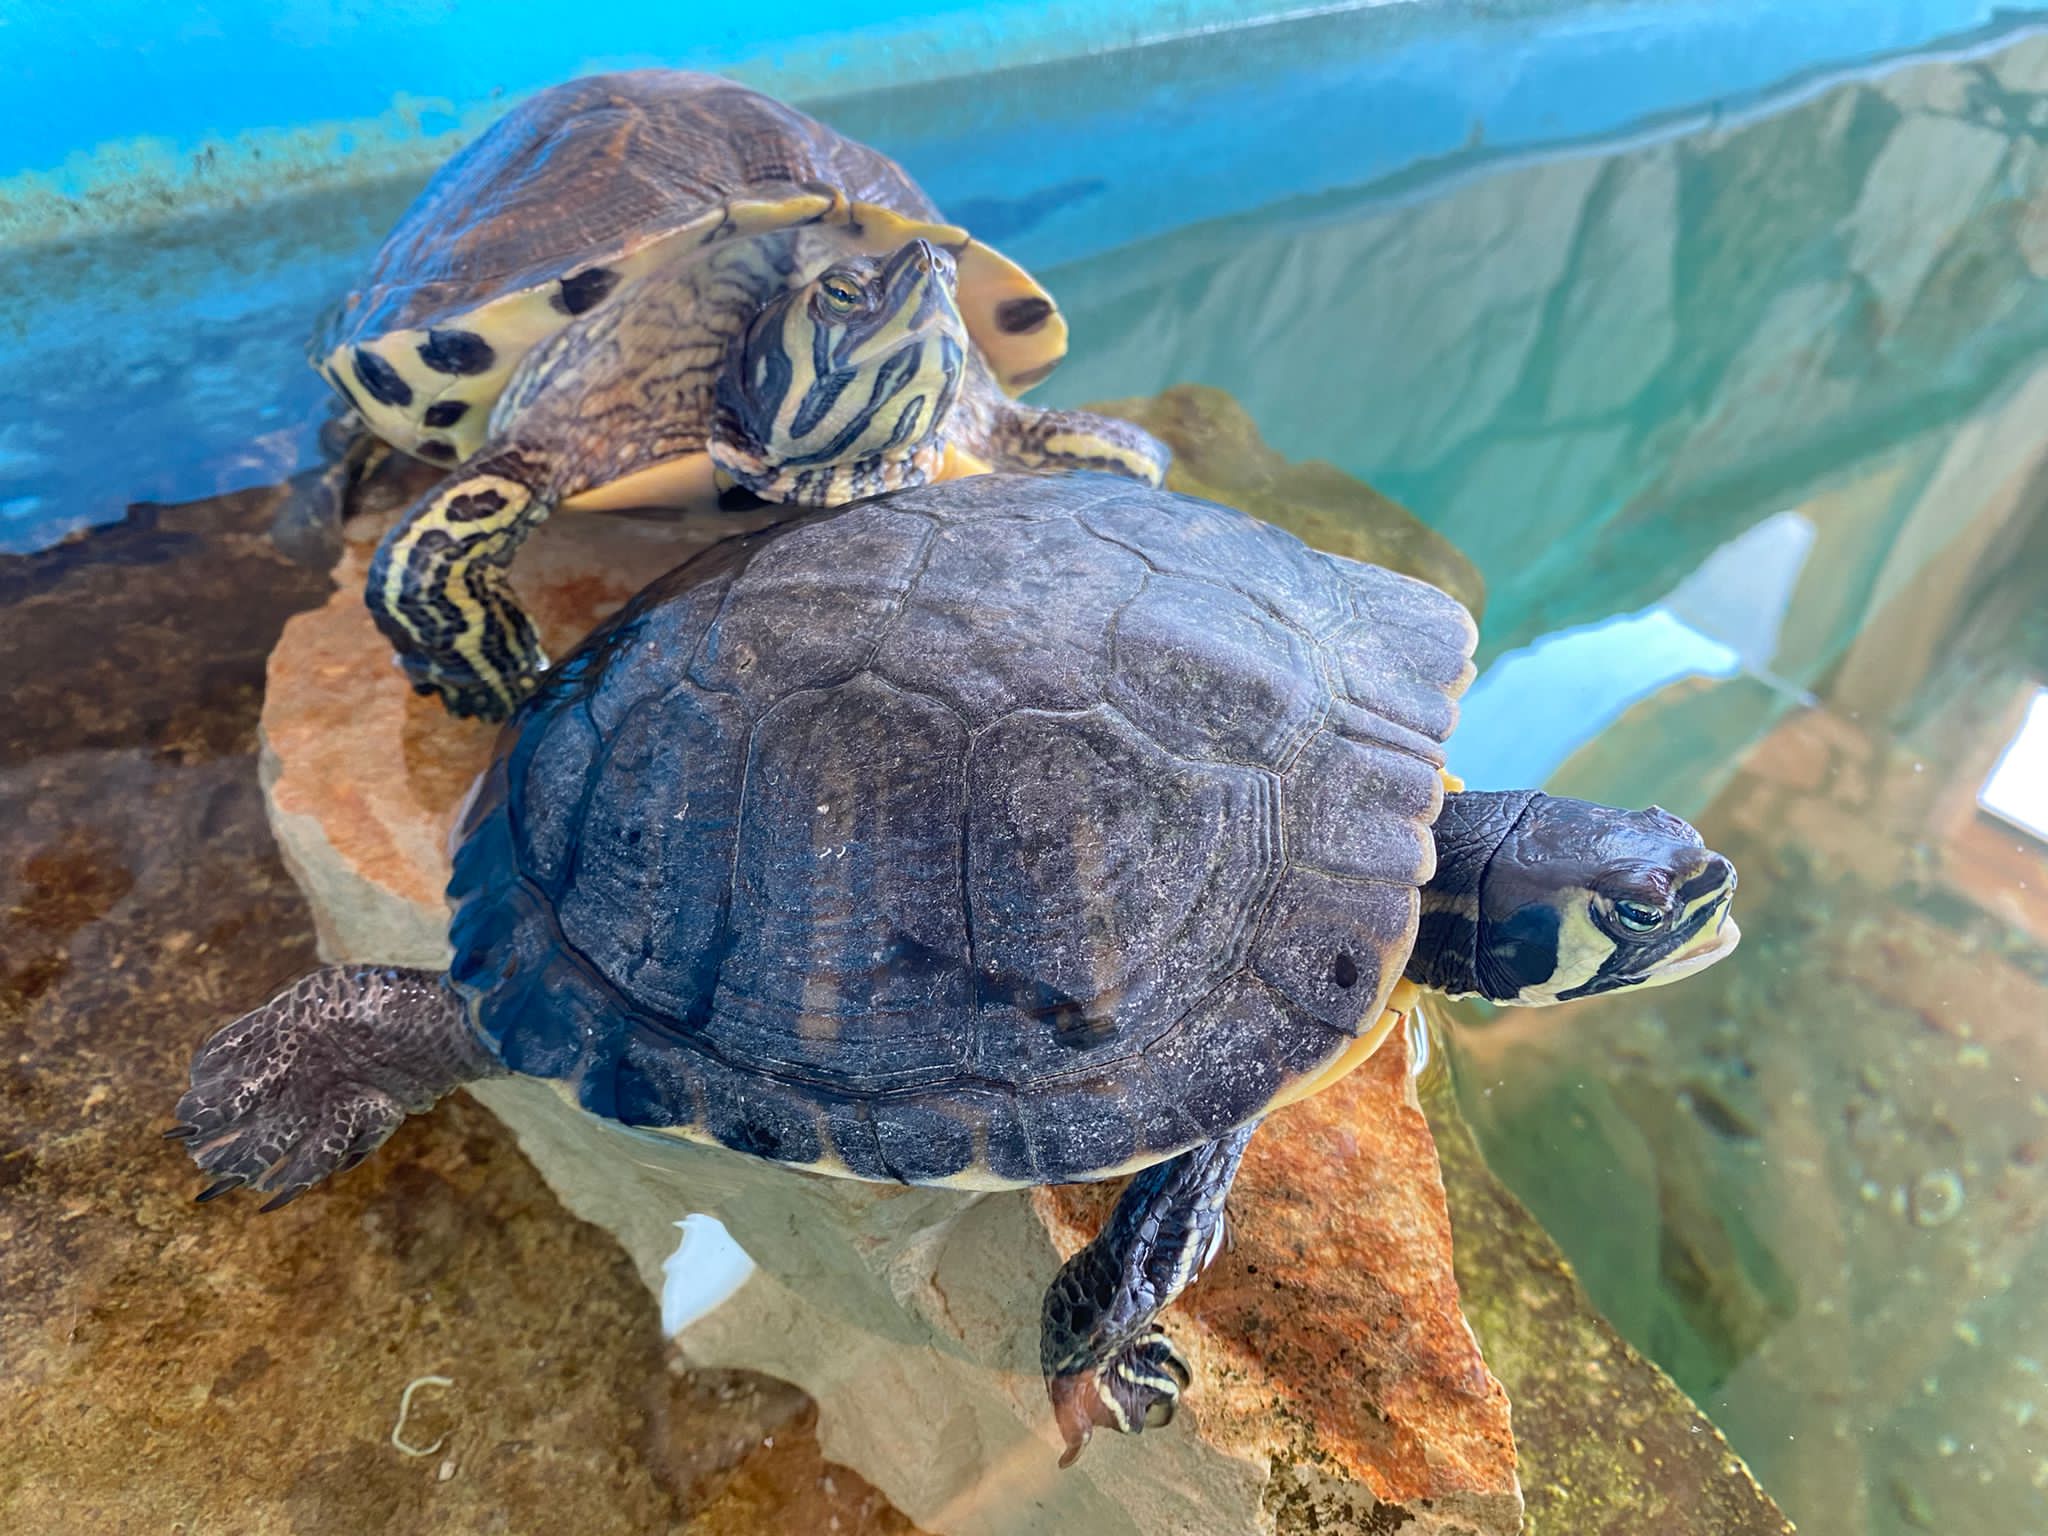 Two terrapins